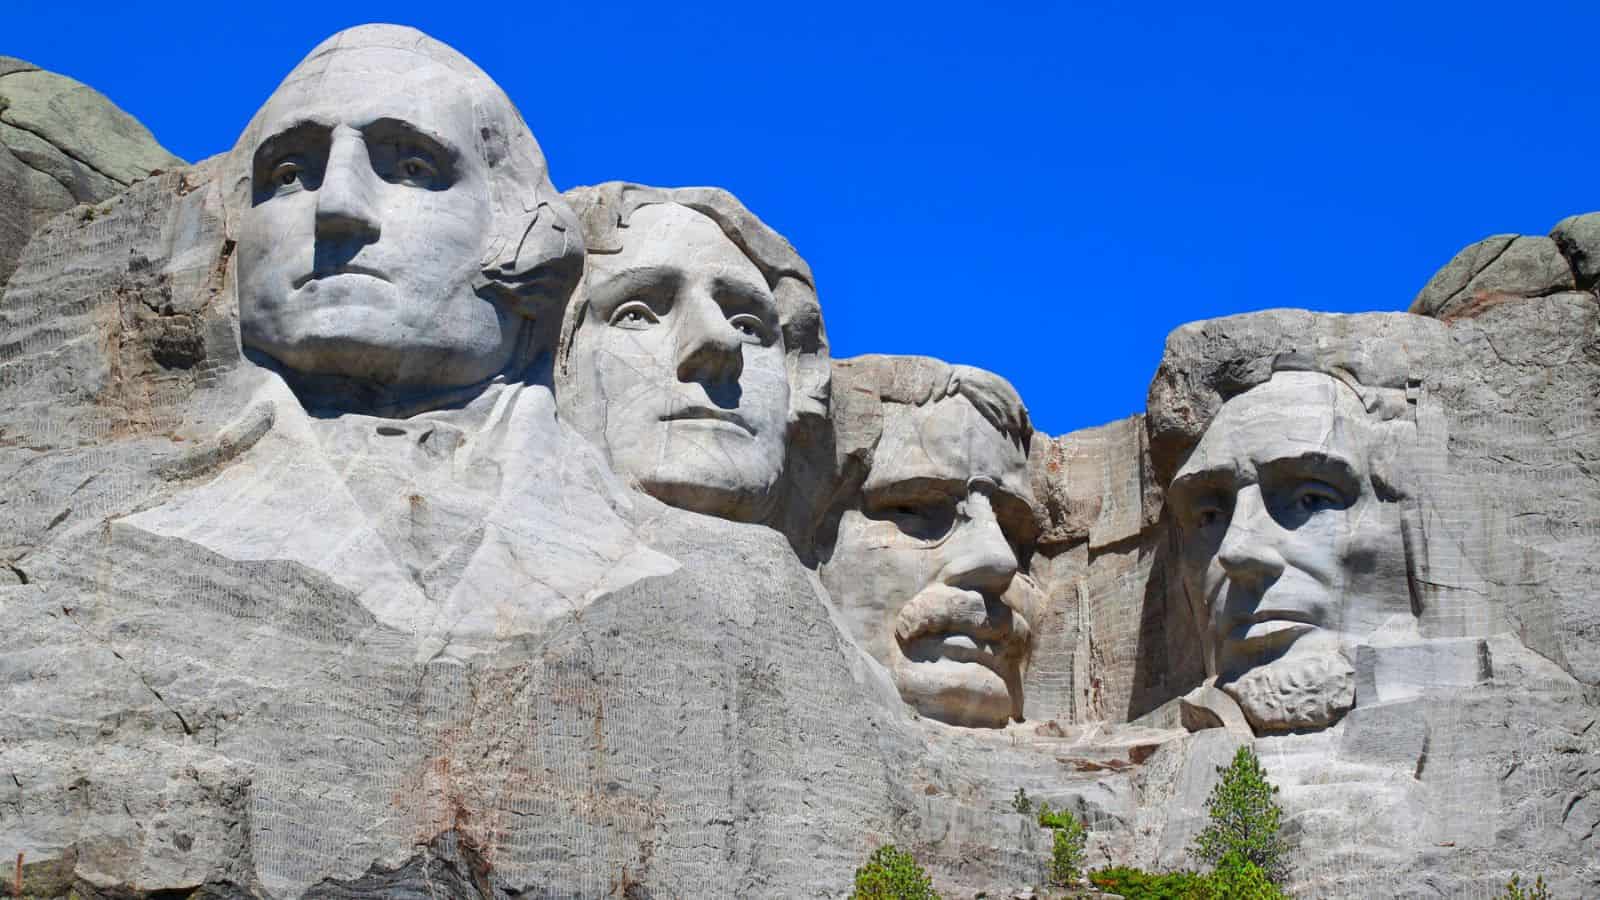 <p>If you’re considering a visit to Mount Rushmore, don’t set your expectations too high. Sure, it’s a famous landmark, but the site itself is underwhelming. </p> <p>This iconic destination can get pretty crowded, and the monument itself isn’t as jaw-dropping as you might think- it’s much smaller than many people expect. Plus, getting up close is a bit of a hassle.</p>